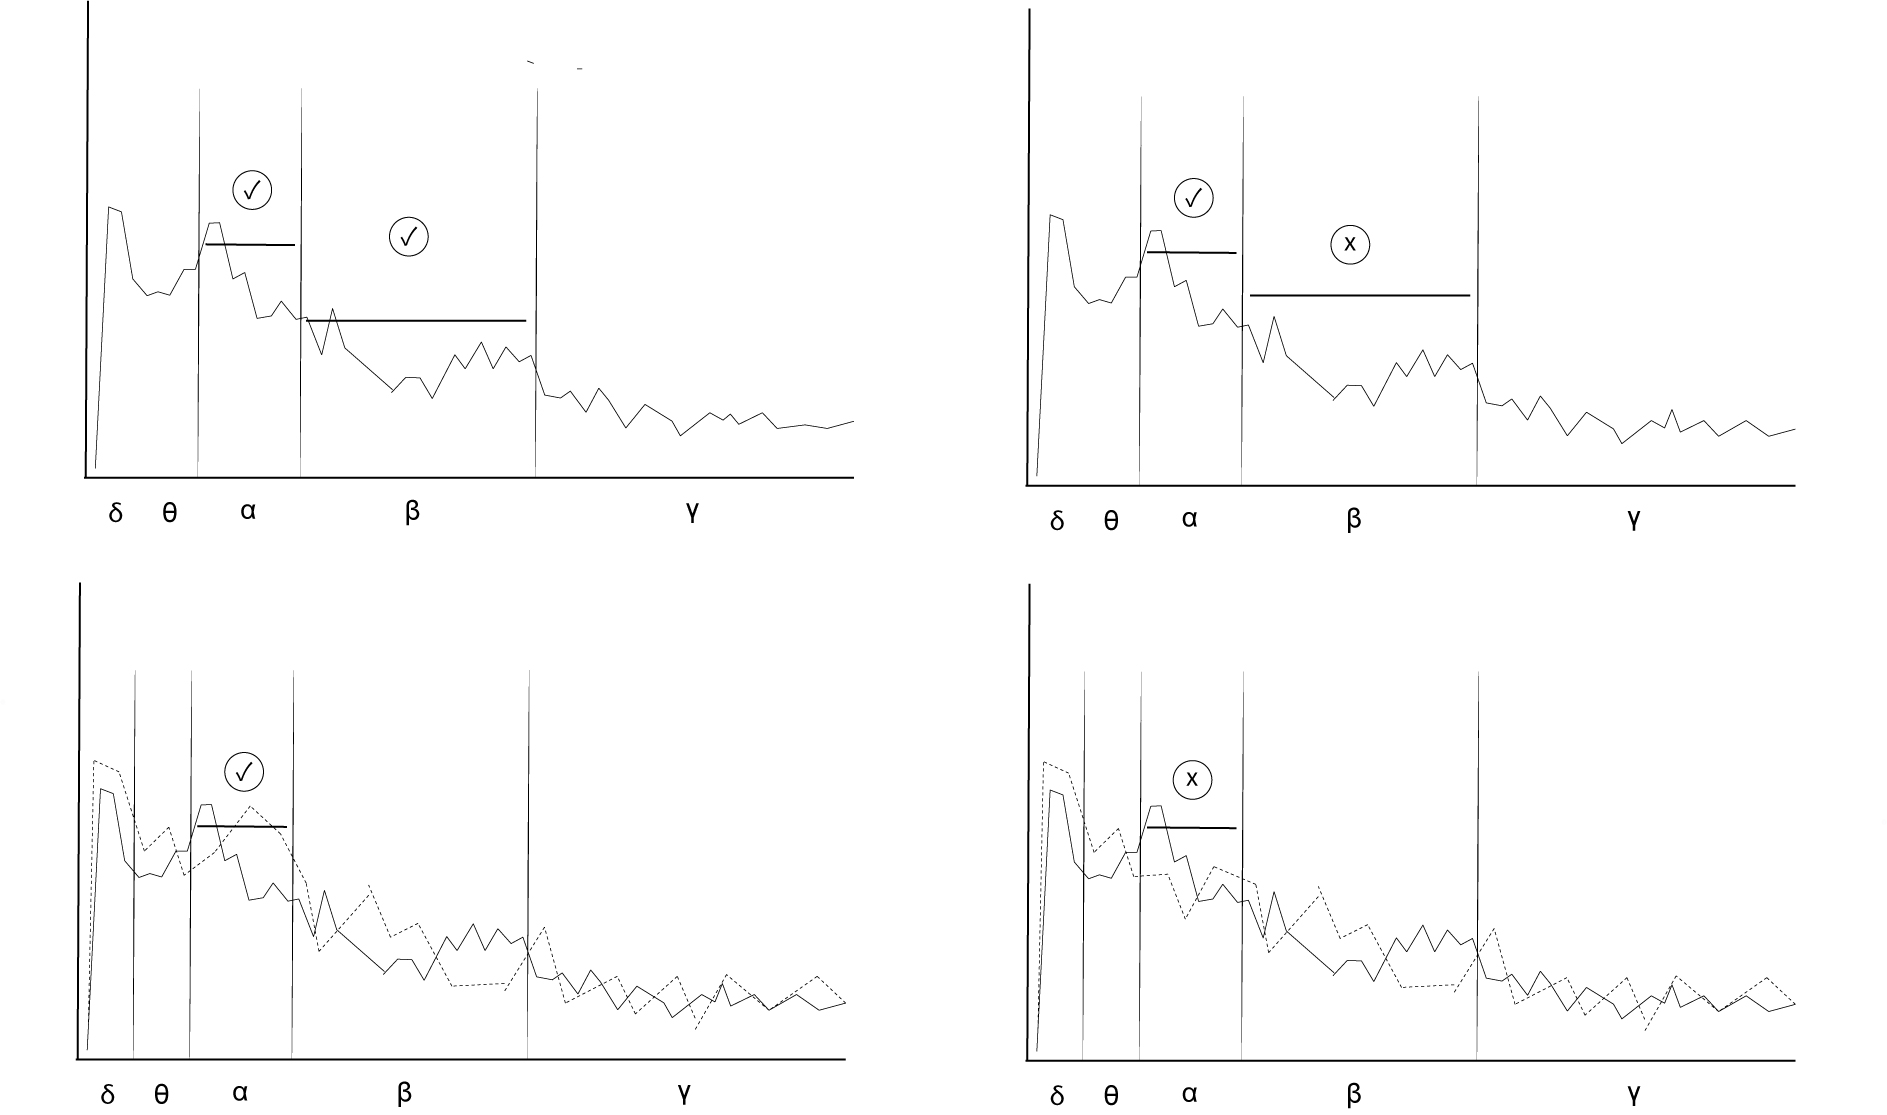 Two-channel indicators and inhibitors plots. Two indicators reward (top left) and do not reward (top right). One indicator used on two signals rewards (bottom left) and does not reward (bottom right).